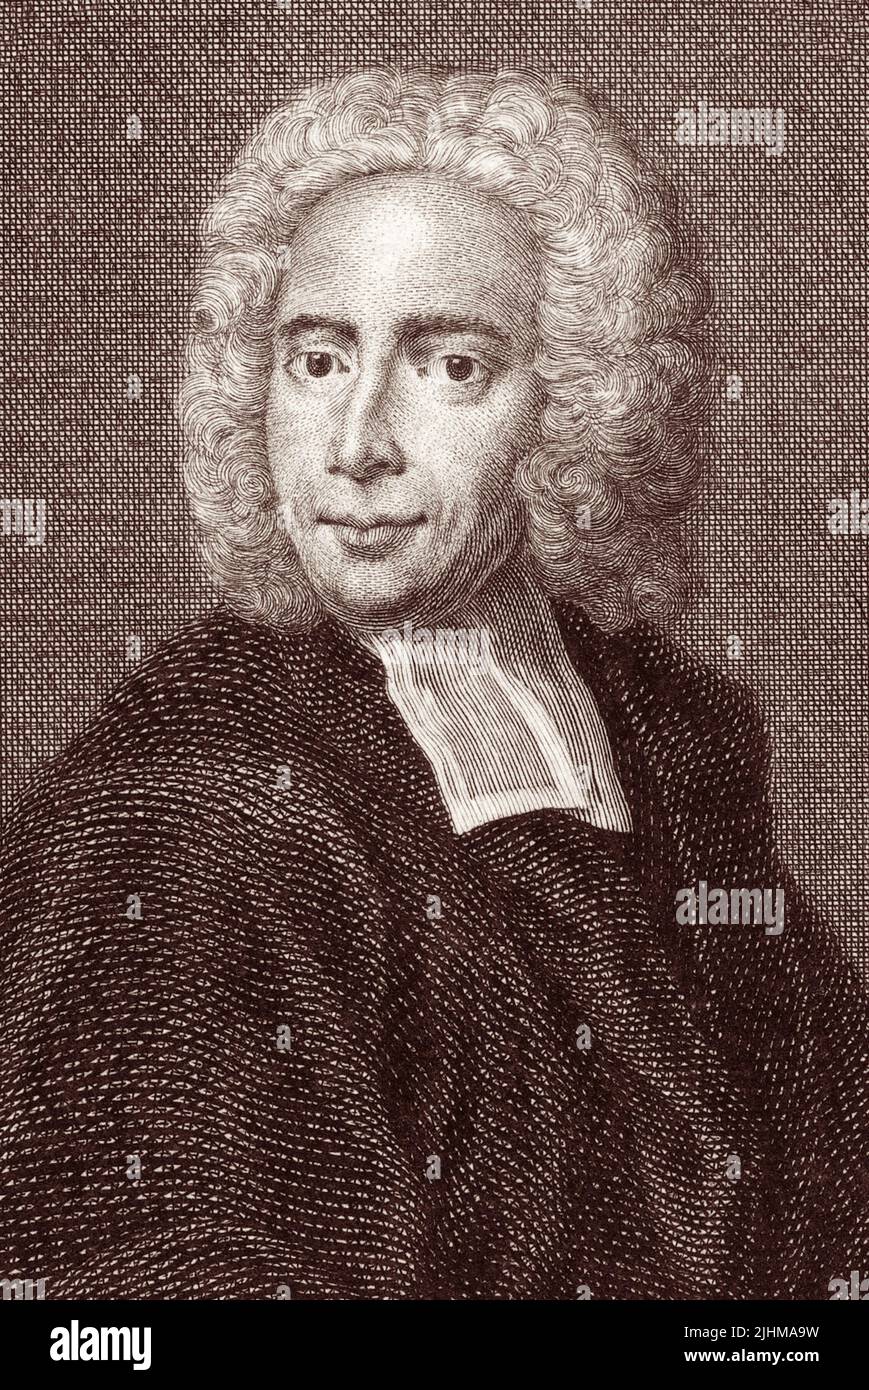 Isaac Watts (1674–1748), known as The Father of English Hymnody,  was a hymn writer, Congregational minister, theologian, and logician. He was prolific and popular as a hymn writer and is credited with some 750 hymns, including "When I Survey the Wondrous Cross", "Joy to the World", and "O God, Our Help in Ages Past". Stock Photo